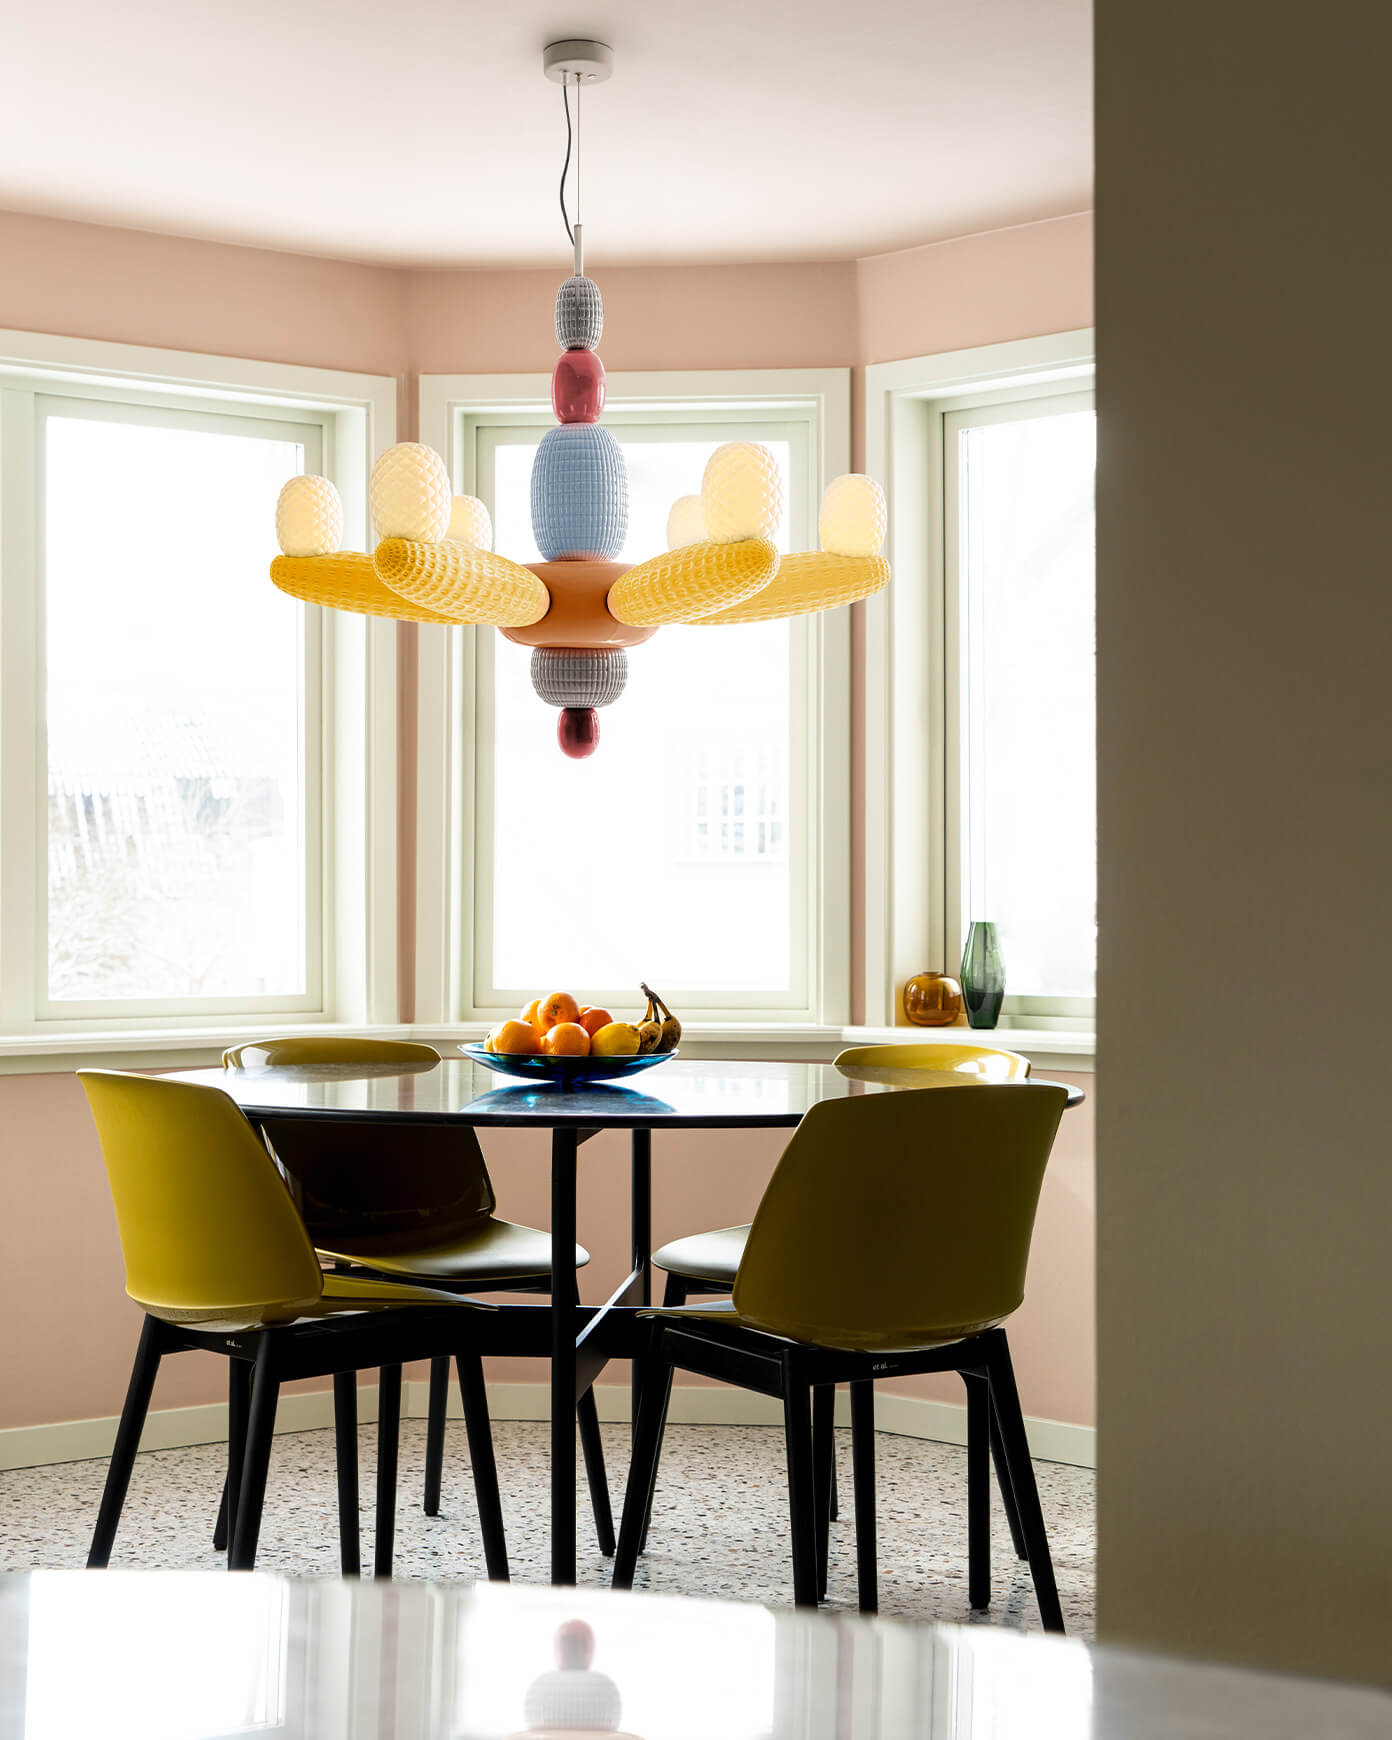 Soft Blown Chandelier over a modern dinning table